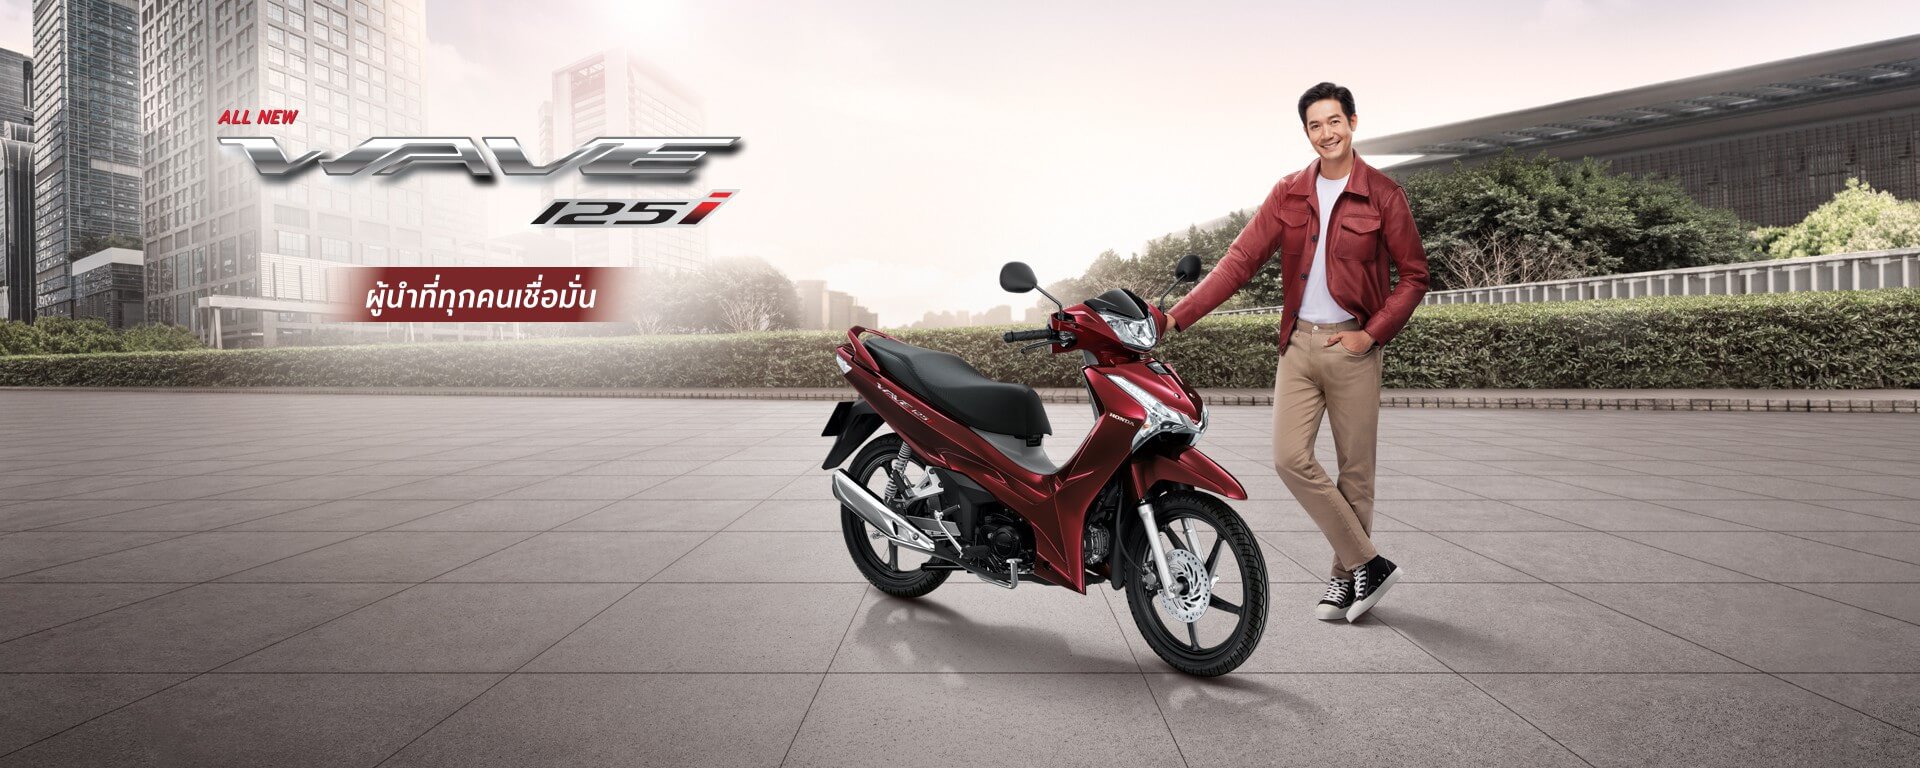 All New Wave125i